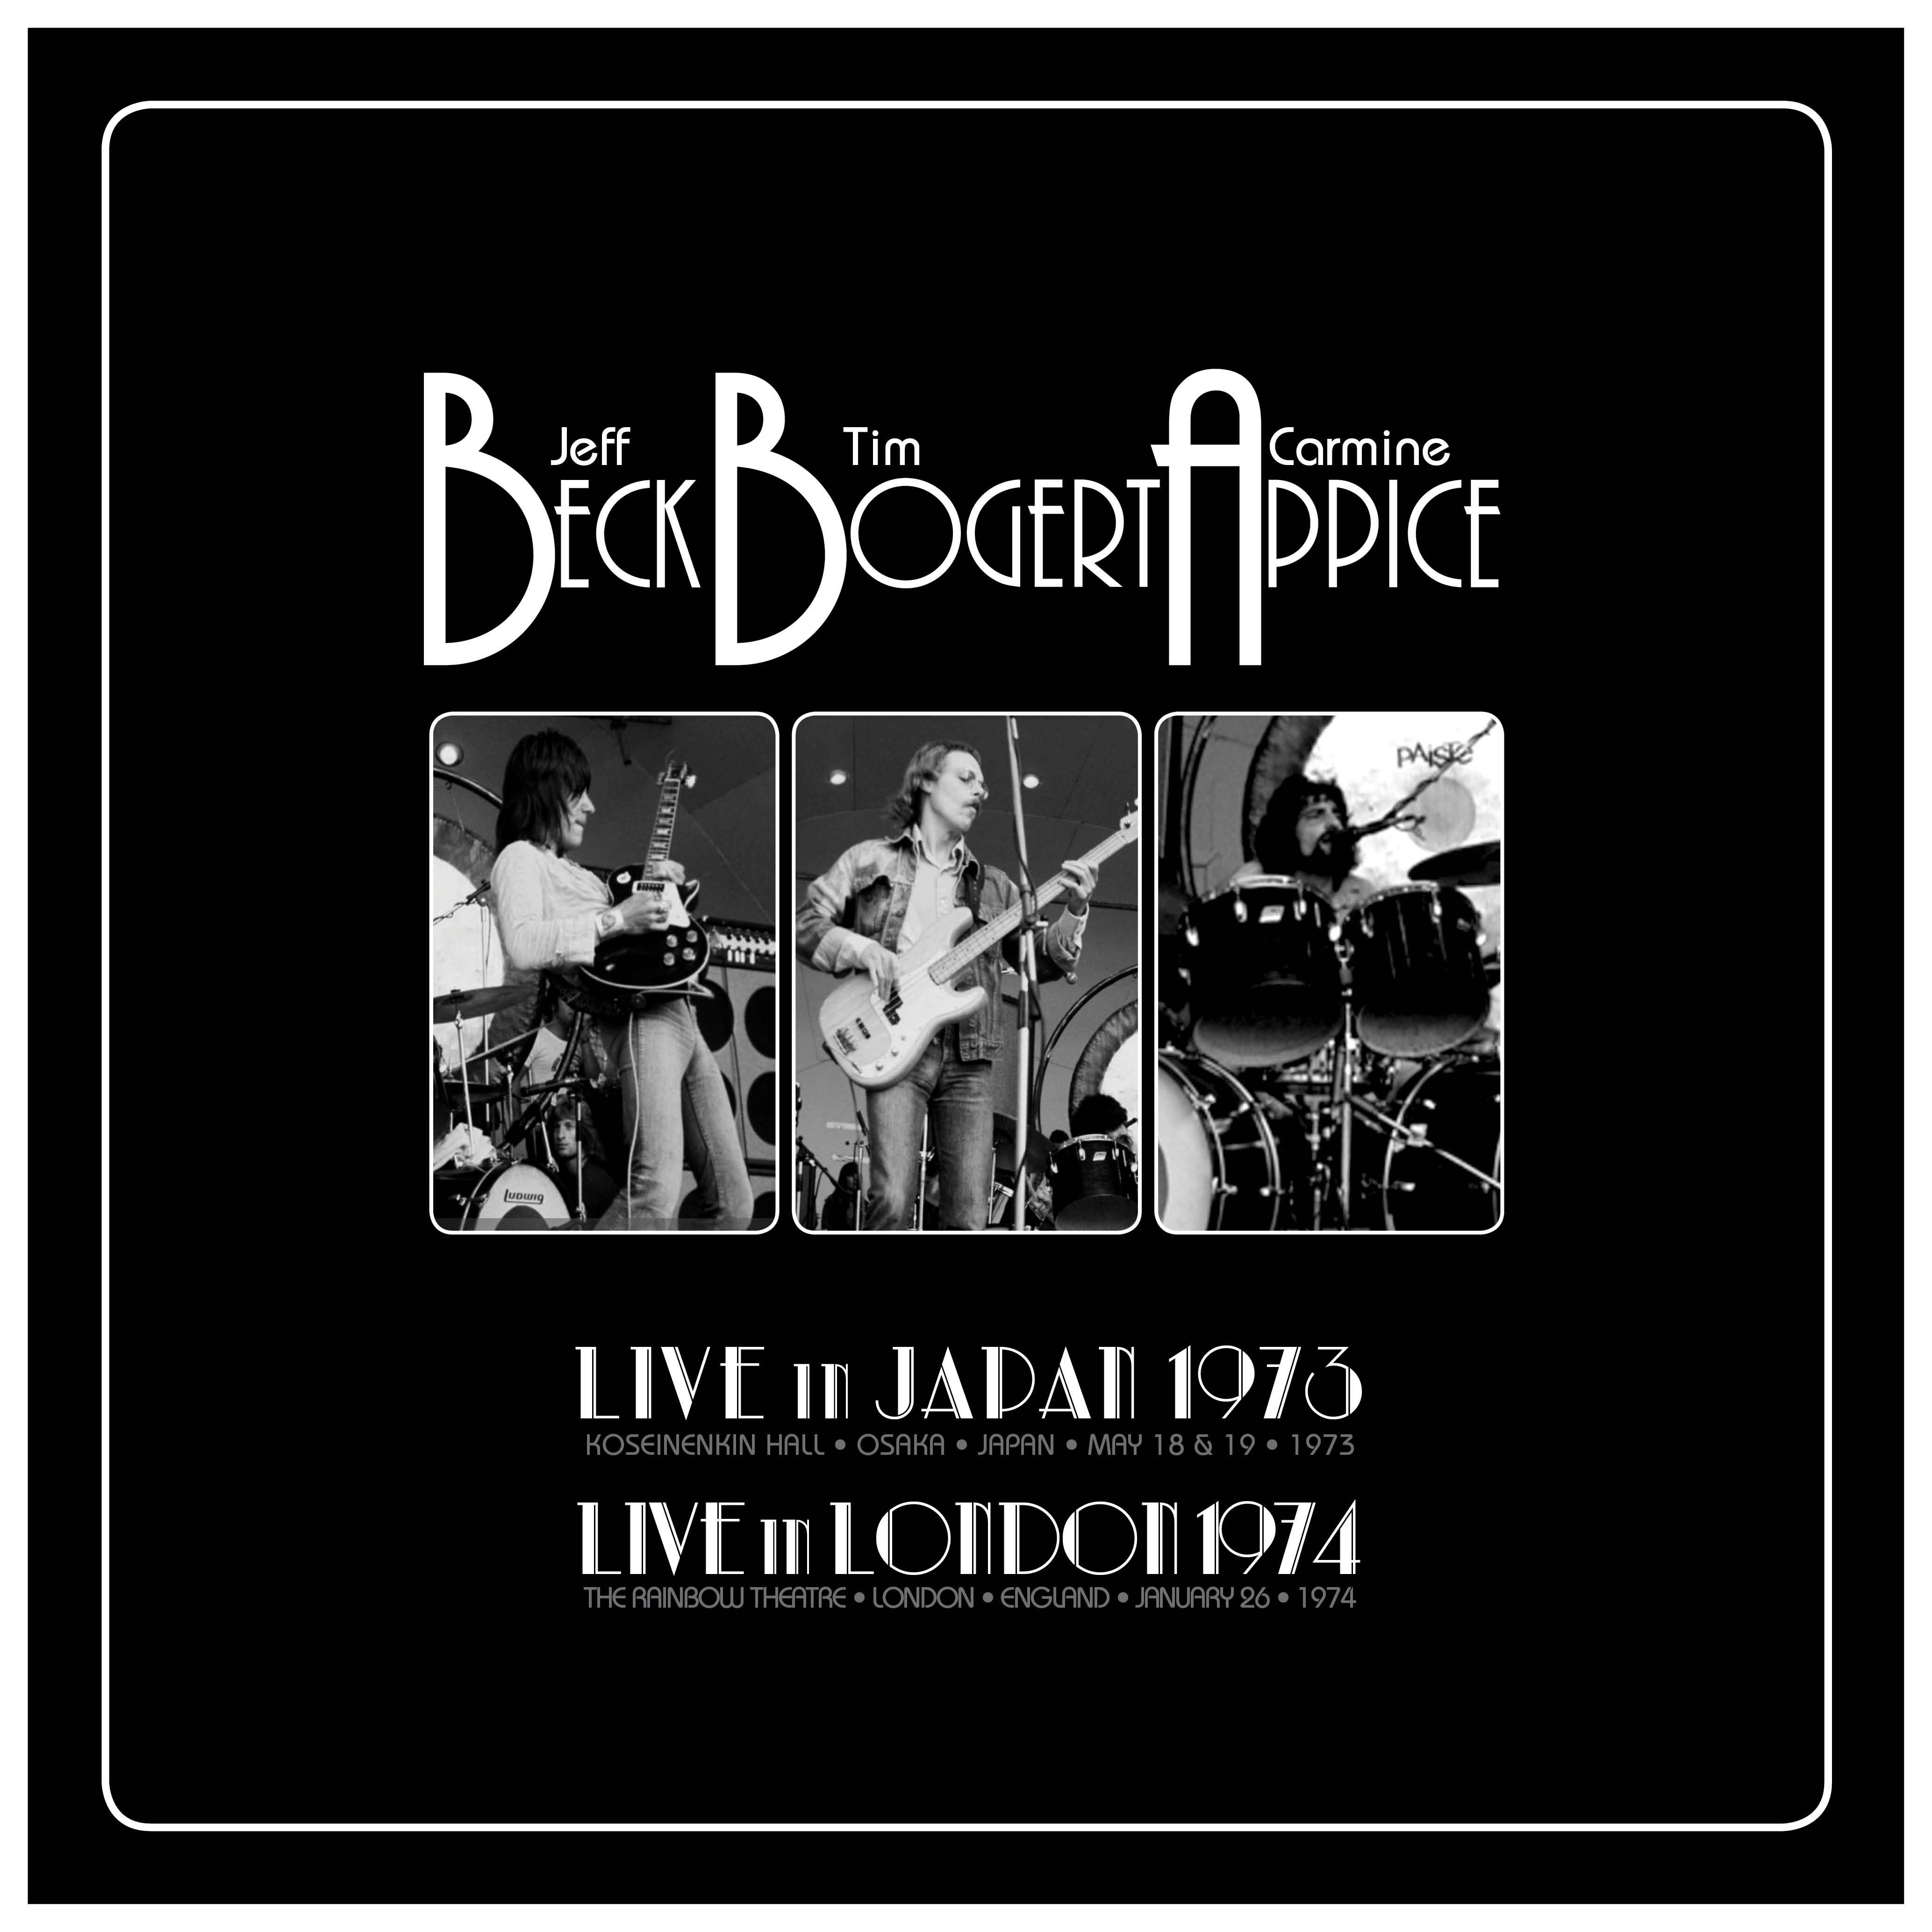 BECK, BOGERT & APPICE - Live In Japan 1973, Live In London 1974